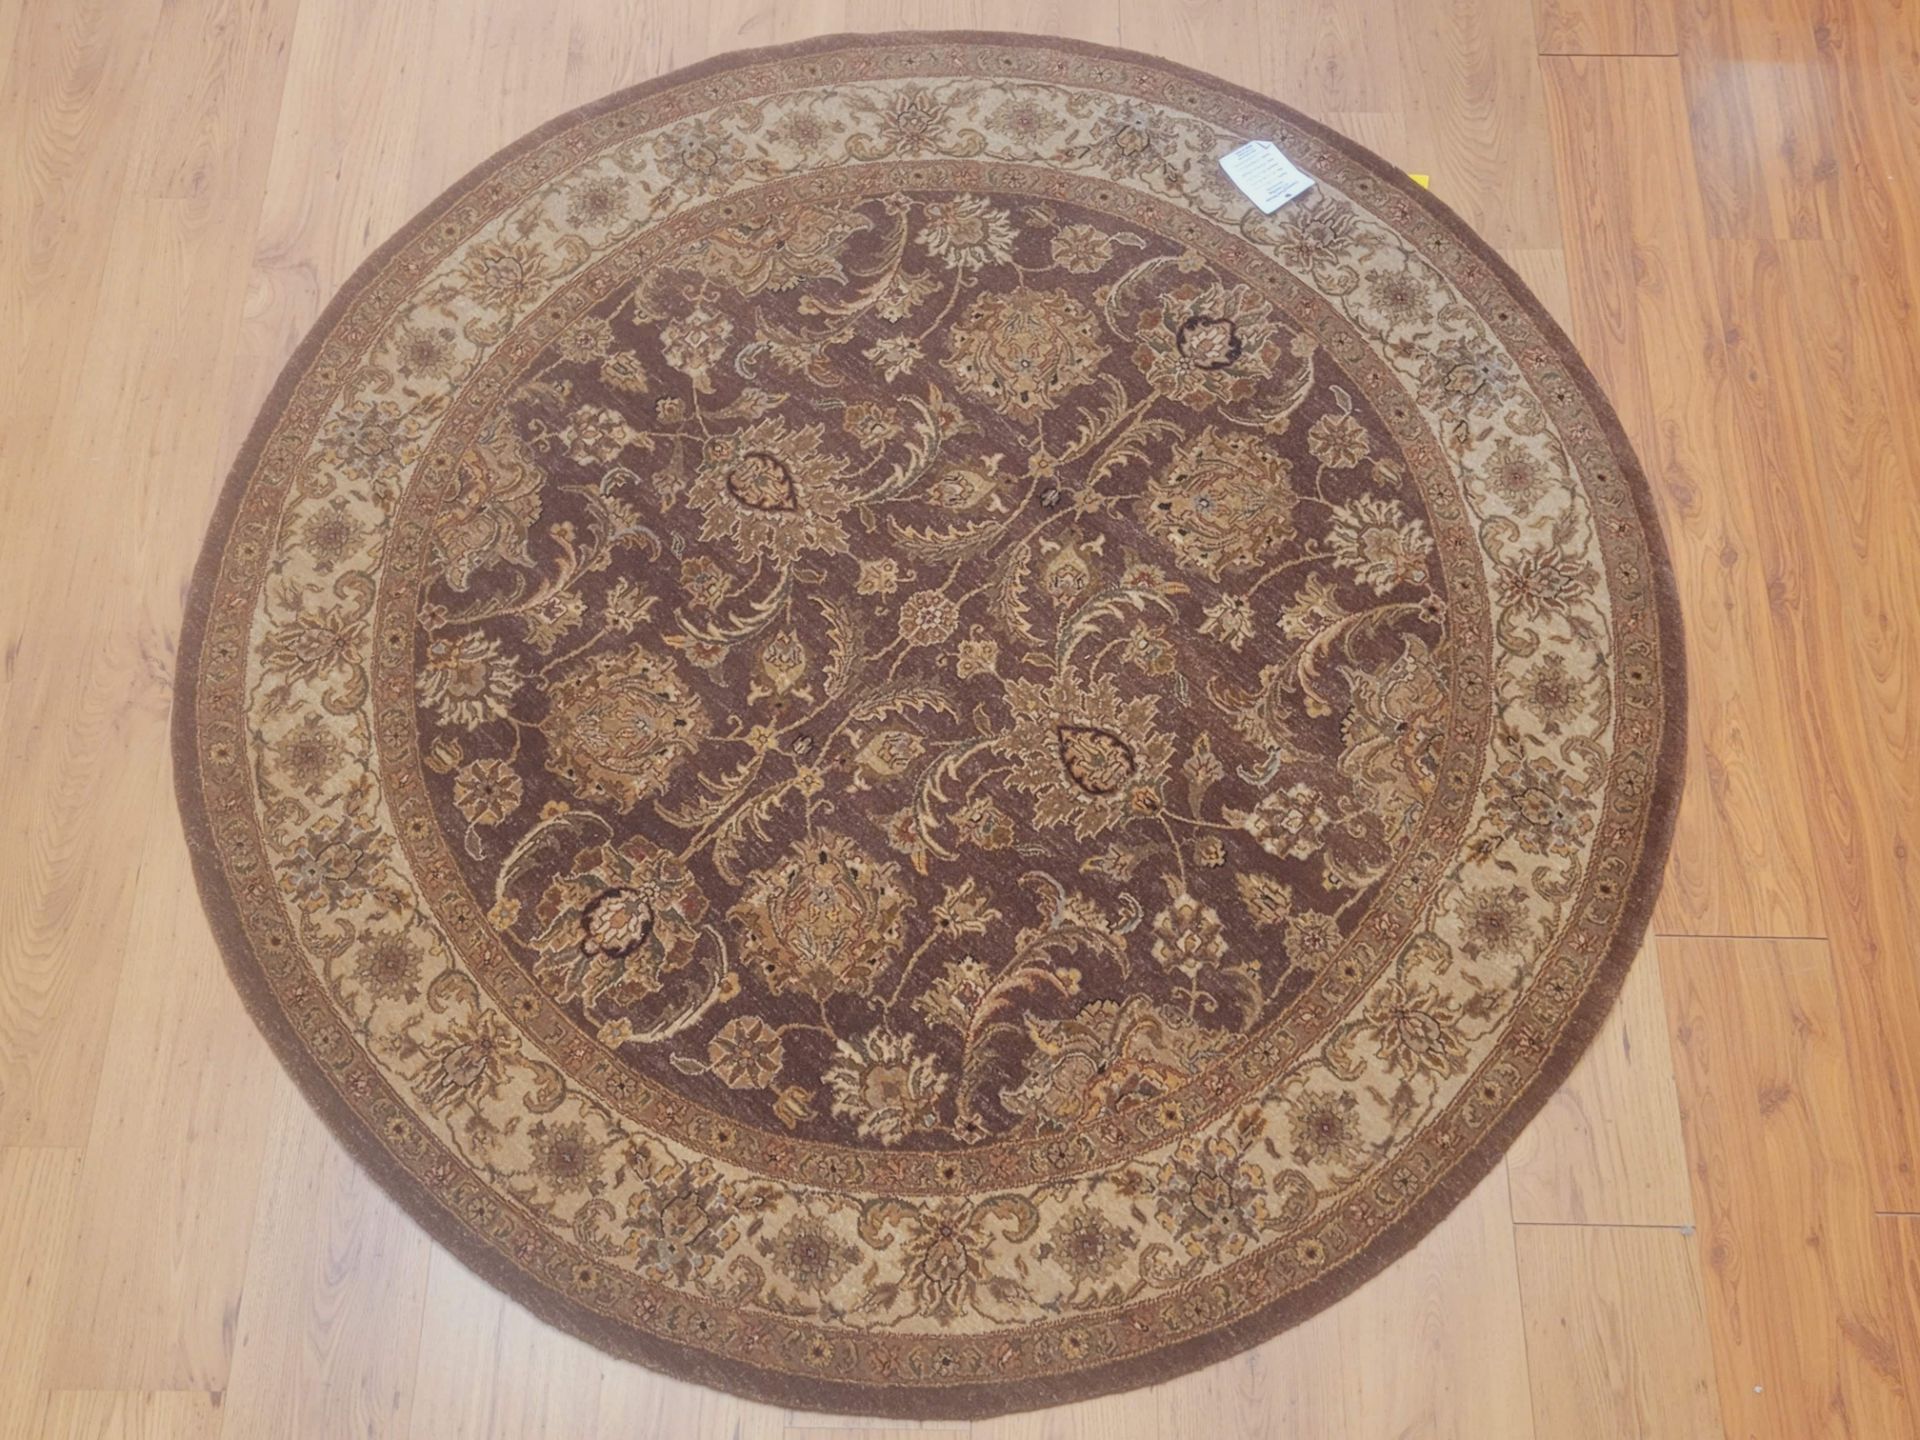 6' ROUND - 100% WOOL HAND KNOTTED IN INDIA - MSRP $4,898.00 (LOCATED IN GALLERY FIVE) INVENTORY